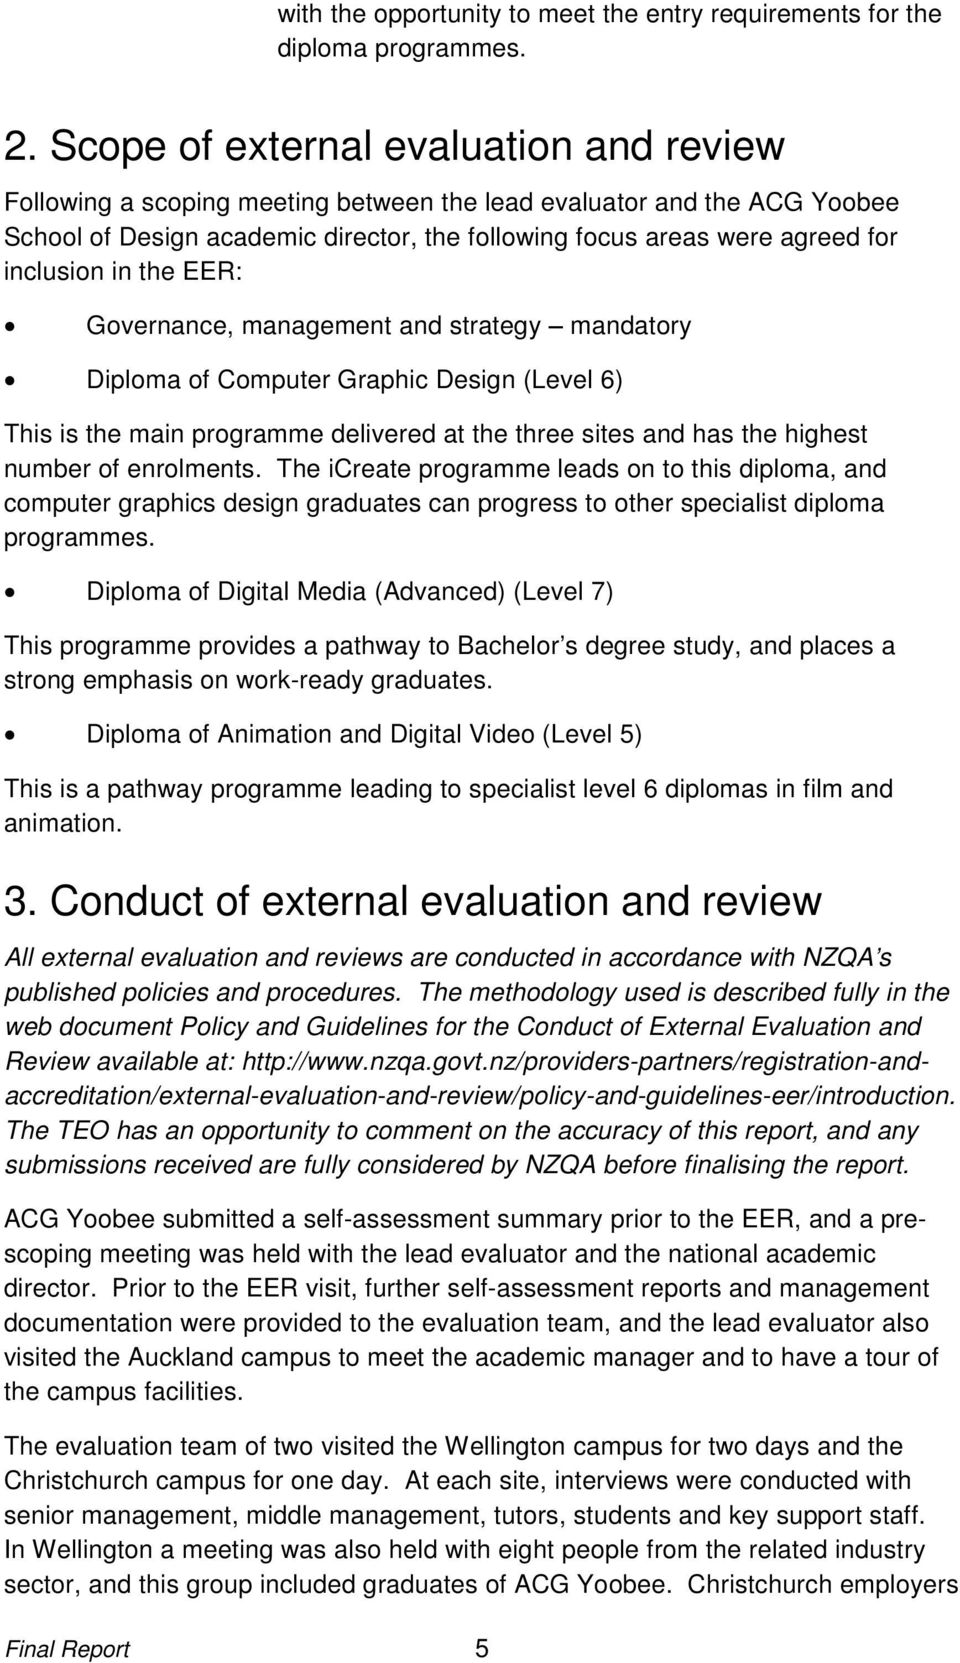 inclusion in the EER: Governance, management and strategy mandatory Diploma of Computer Graphic Design (Level 6) This is the main programme delivered at the three sites and has the highest number of